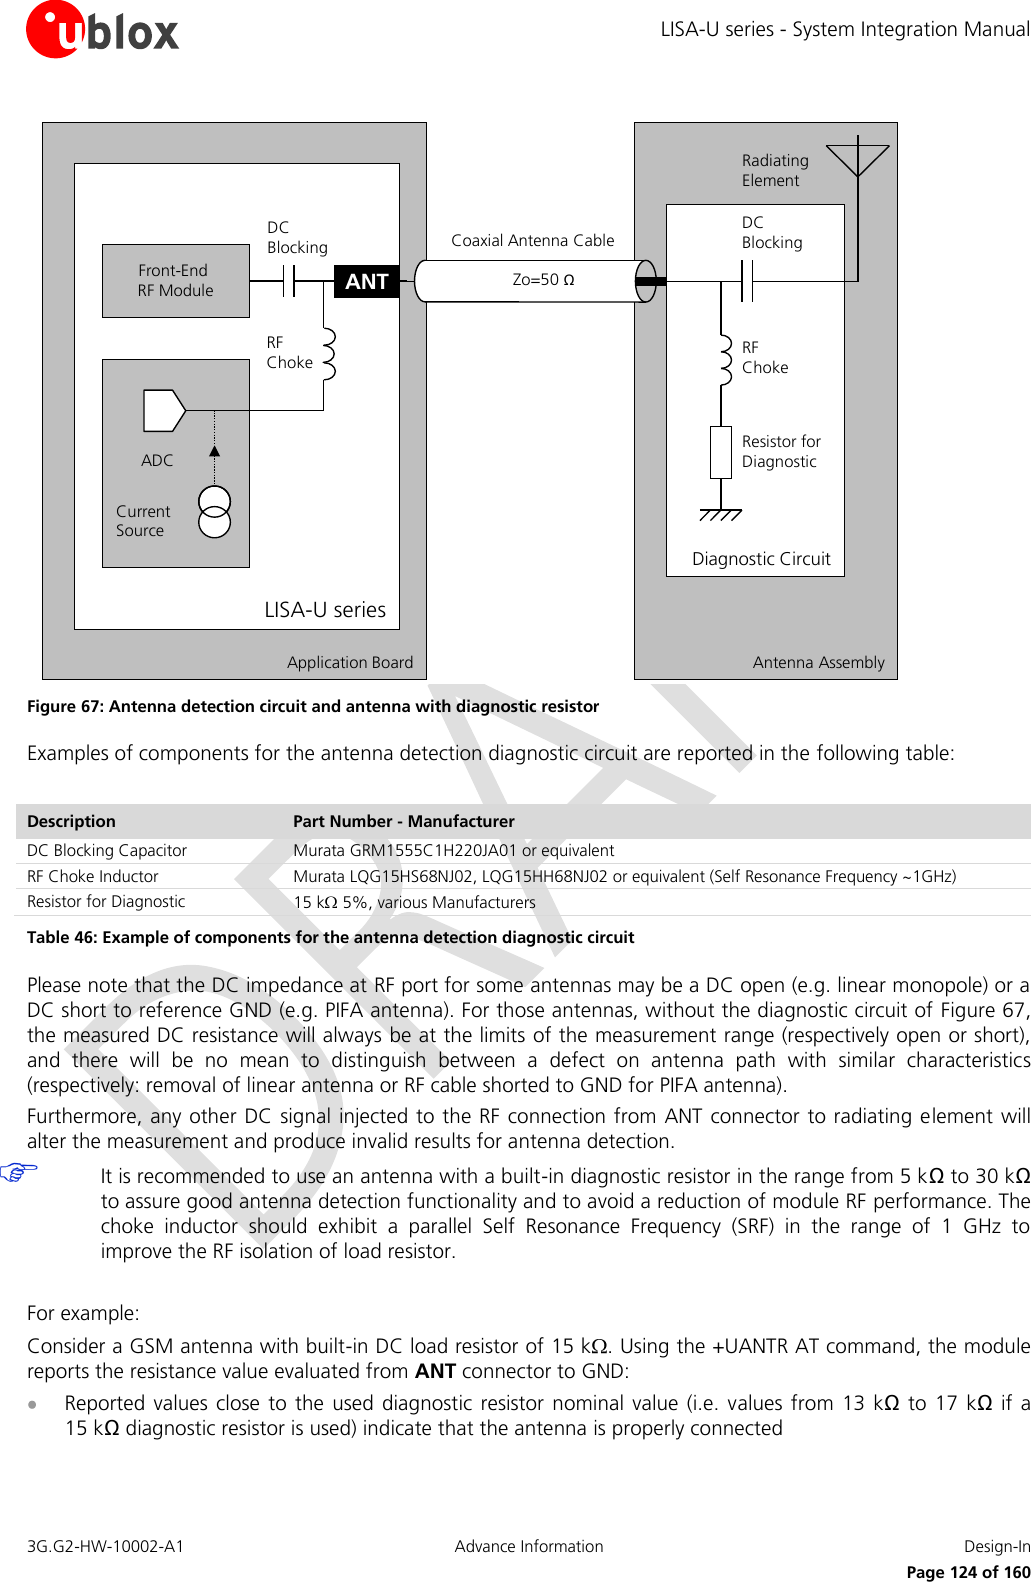 LISA-U series - System Integration Manual 3G.G2-HW-10002-A1  Advance Information  Design-In      Page 124 of 160 Application Board Antenna AssemblyDiagnostic CircuitLISA-U seriesADCCurrent SourceRF ChokeDC BlockingFront-End RF ModuleRF ChokeDC BlockingRadiating ElementZo=50 ΩResistor for DiagnosticCoaxial Antenna CableANT Figure 67: Antenna detection circuit and antenna with diagnostic resistor Examples of components for the antenna detection diagnostic circuit are reported in the following table:  Description Part Number - Manufacturer DC Blocking Capacitor  Murata GRM1555C1H220JA01 or equivalent RF Choke Inductor Murata LQG15HS68NJ02, LQG15HH68NJ02 or equivalent (Self Resonance Frequency ~1GHz) Resistor for Diagnostic  15 k  5%, various Manufacturers Table 46: Example of components for the antenna detection diagnostic circuit Please note that the DC impedance at RF port for some antennas may be a DC open (e.g. linear monopole) or a DC short to reference GND (e.g. PIFA antenna). For those antennas, without the diagnostic circuit of Figure 67, the measured DC resistance will always be at the limits of the measurement range (respectively open or short), and  there  will  be  no  mean  to  distinguish  between  a  defect  on  antenna  path  with  similar  characteristics (respectively: removal of linear antenna or RF cable shorted to GND for PIFA antenna). Furthermore, any other DC signal injected to the RF connection from ANT connector to radiating element will alter the measurement and produce invalid results for antenna detection.  It is recommended to use an antenna with a built-in diagnostic resistor in the range from 5 kΩ to 30 kΩ to assure good antenna detection functionality and to avoid a reduction of module RF performance. The choke  inductor  should  exhibit  a  parallel  Self  Resonance  Frequency  (SRF)  in  the  range  of  1  GHz  to improve the RF isolation of load resistor.  For example: Consider a GSM antenna with built-in DC load resistor of 15 k . Using the +UANTR AT command, the module reports the resistance value evaluated from ANT connector to GND:  Reported  values close  to the  used diagnostic  resistor  nominal  value (i.e.  values from  13 kΩ to  17 kΩ  if a 15 kΩ diagnostic resistor is used) indicate that the antenna is properly connected 